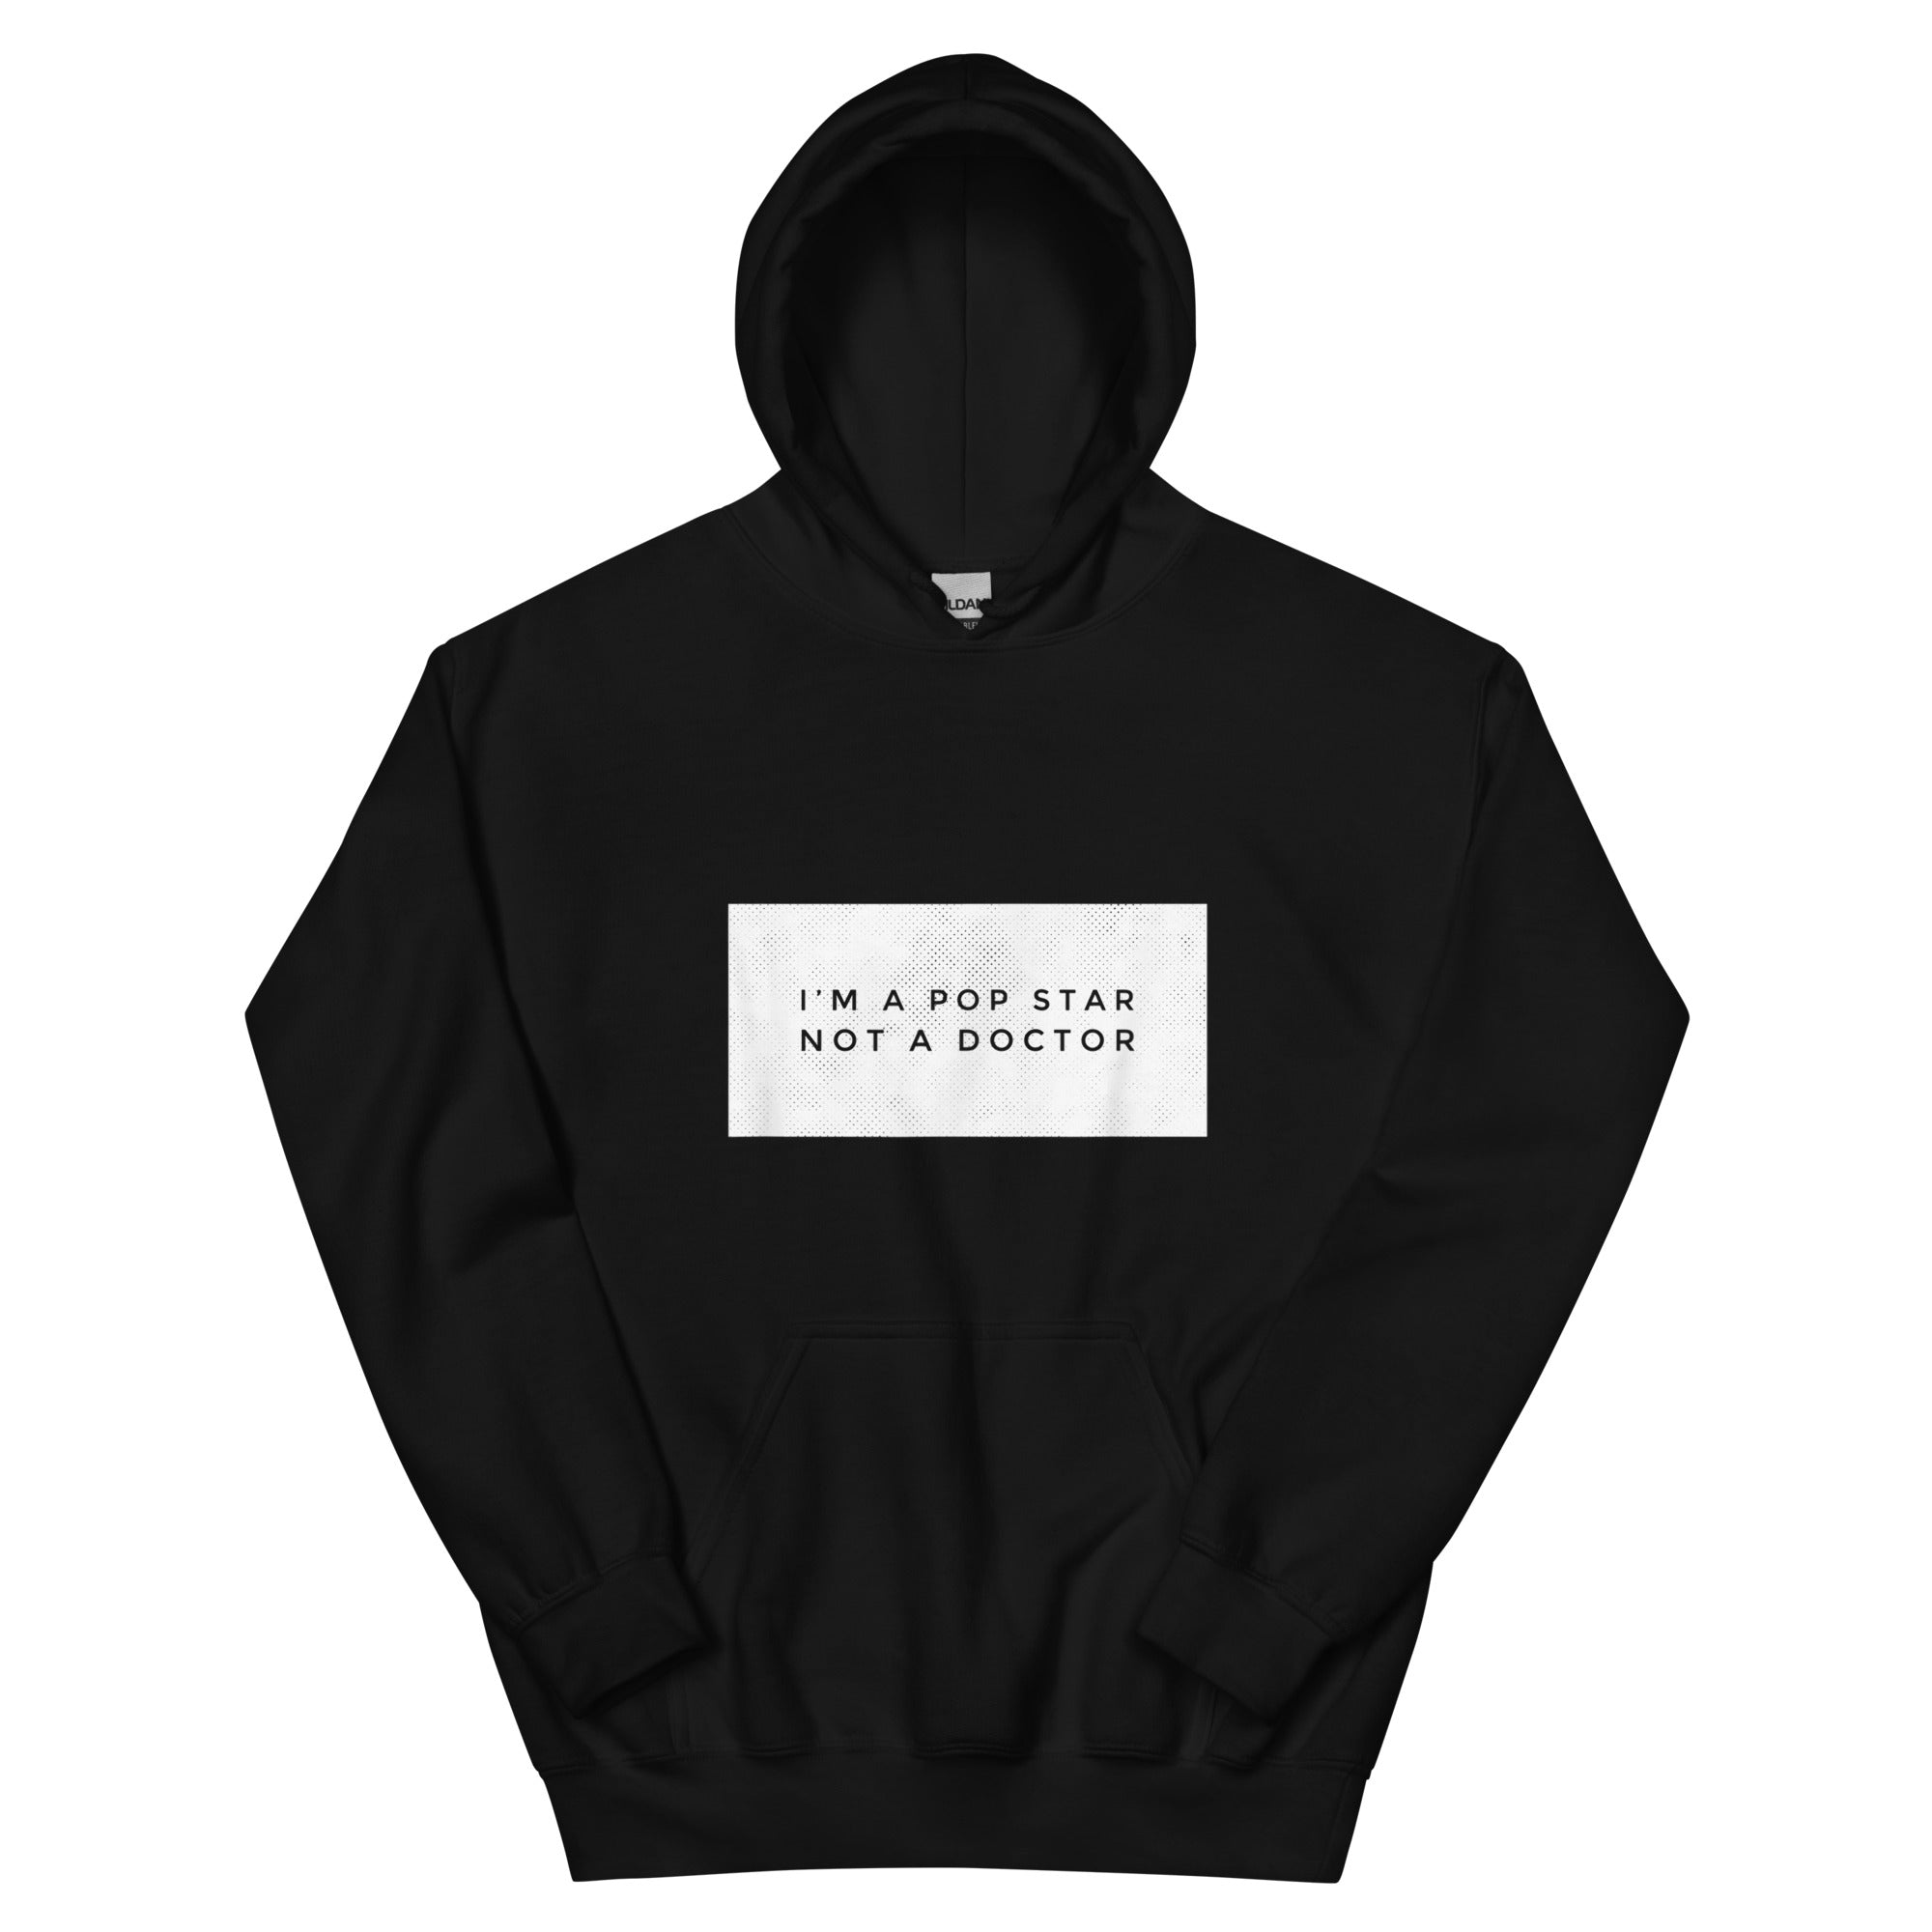 I'M A POP STAR NOT A DOCTOR Unisex Hoodie - Hiphopya